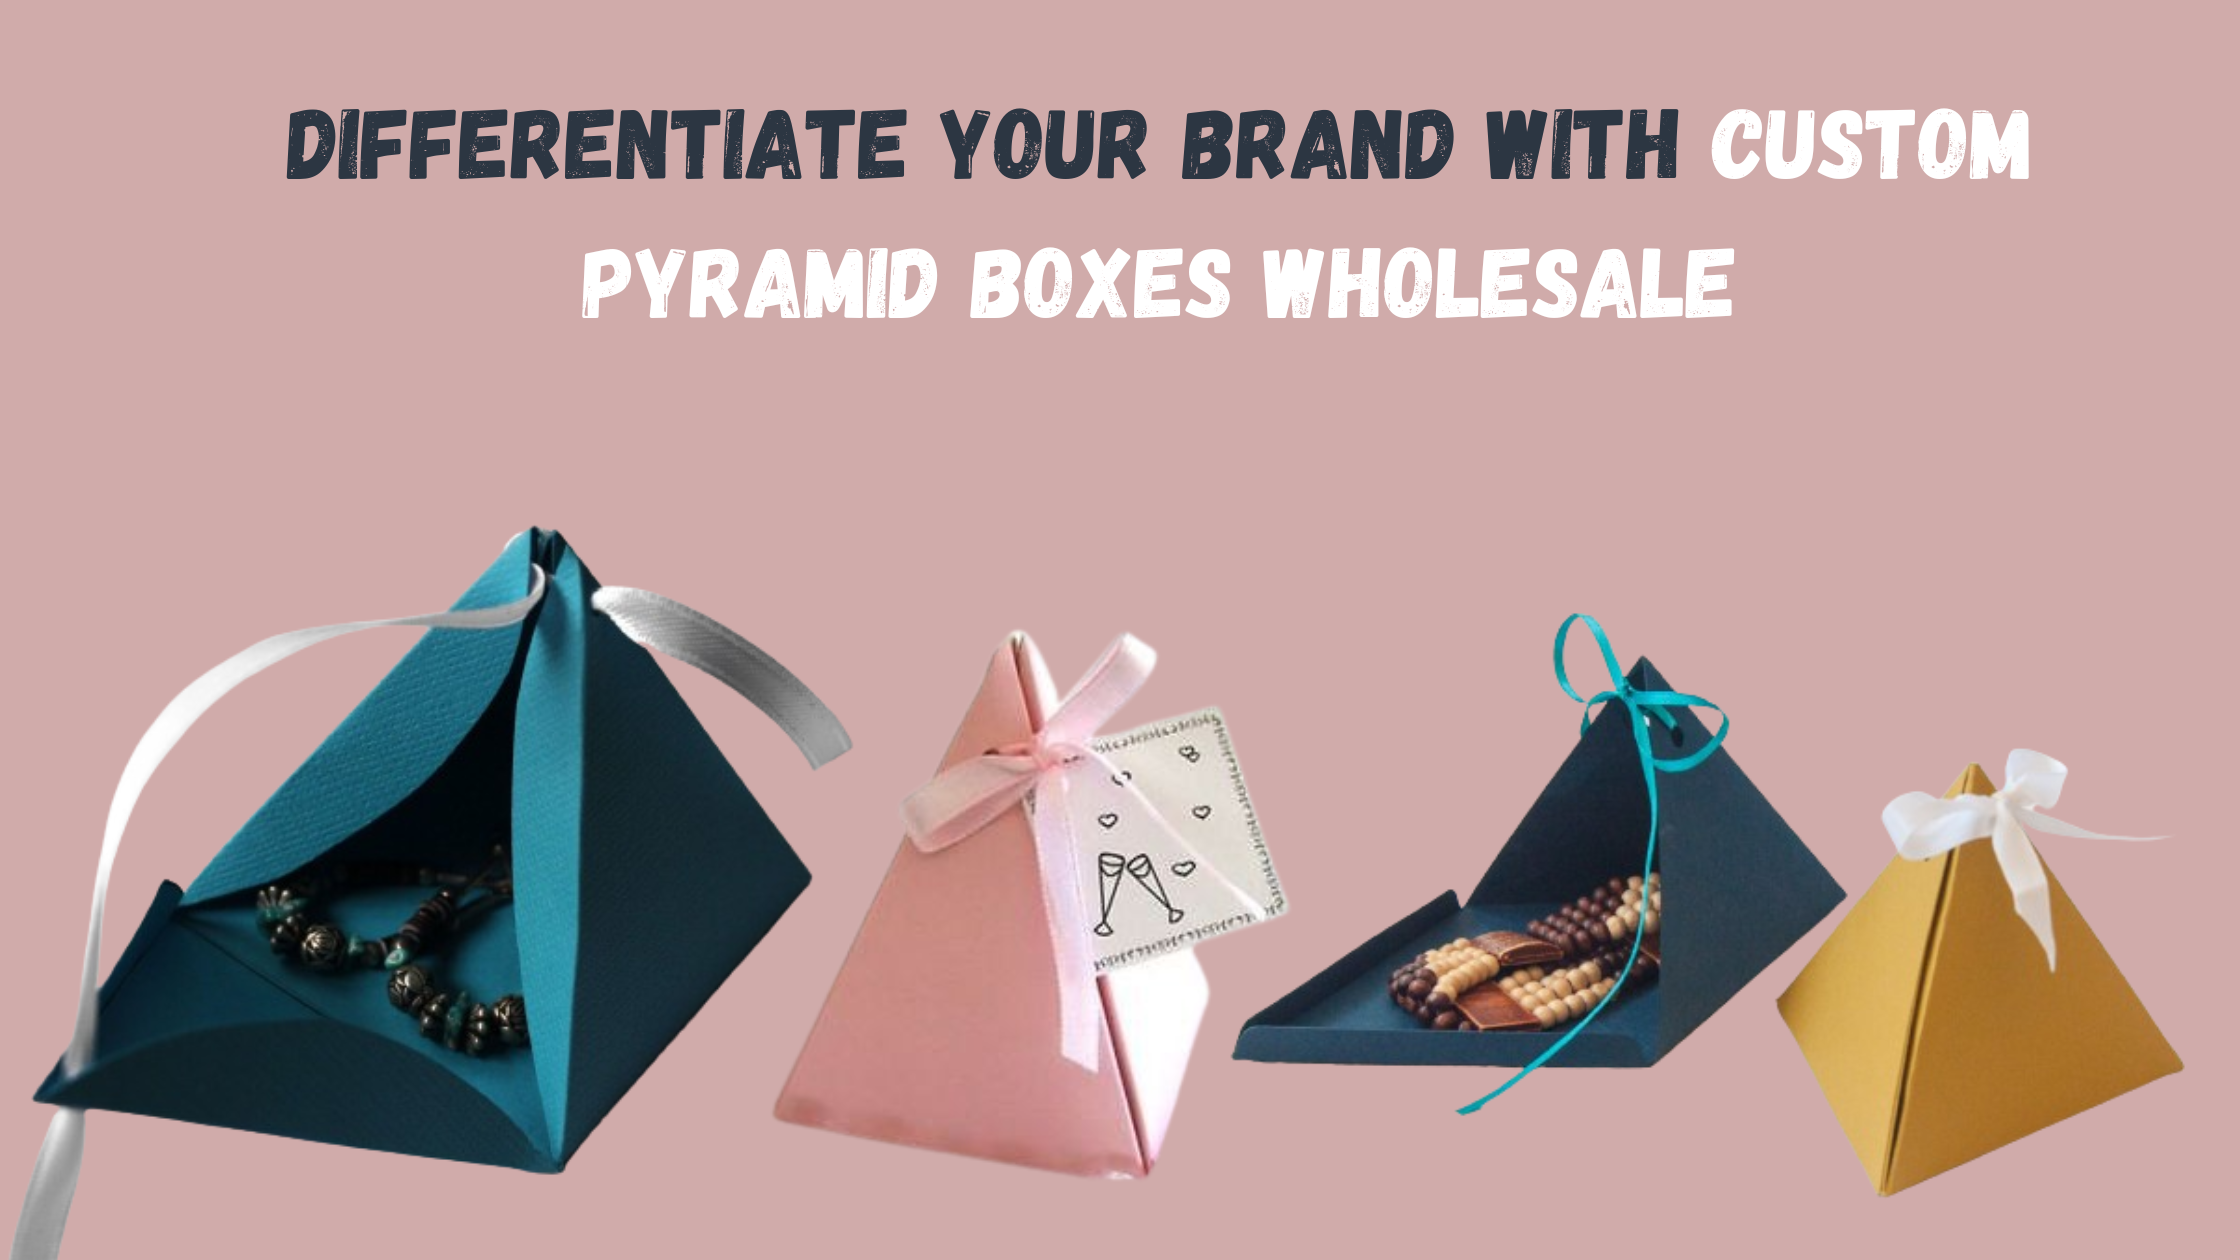 Differentiate Your Brand With Custom Pyramid Boxes Wholesale